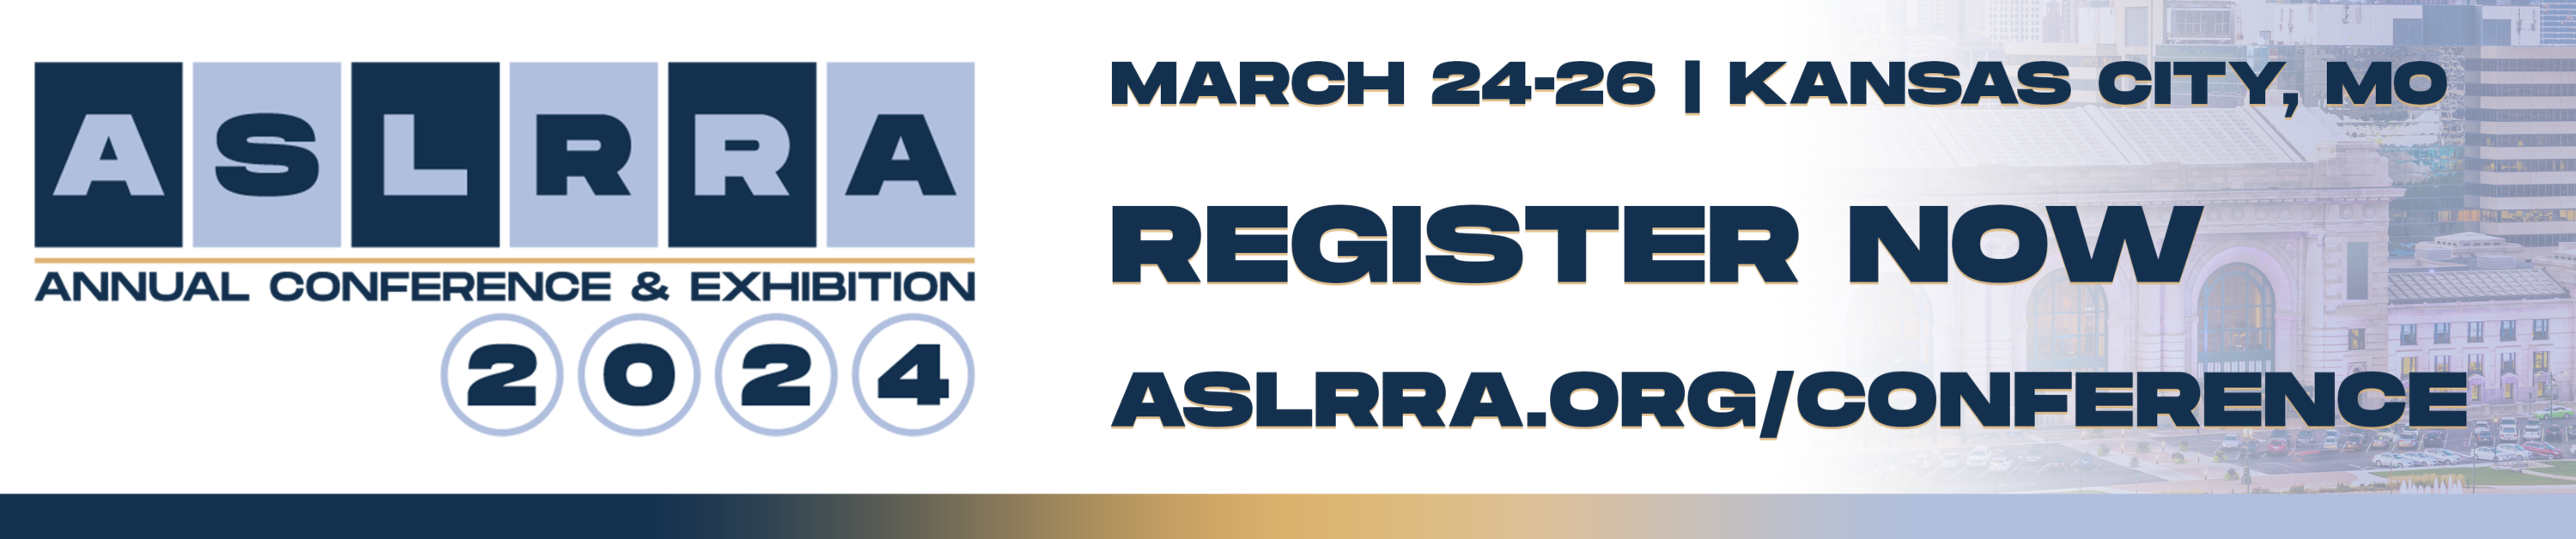 ASLRRA Annual Conference